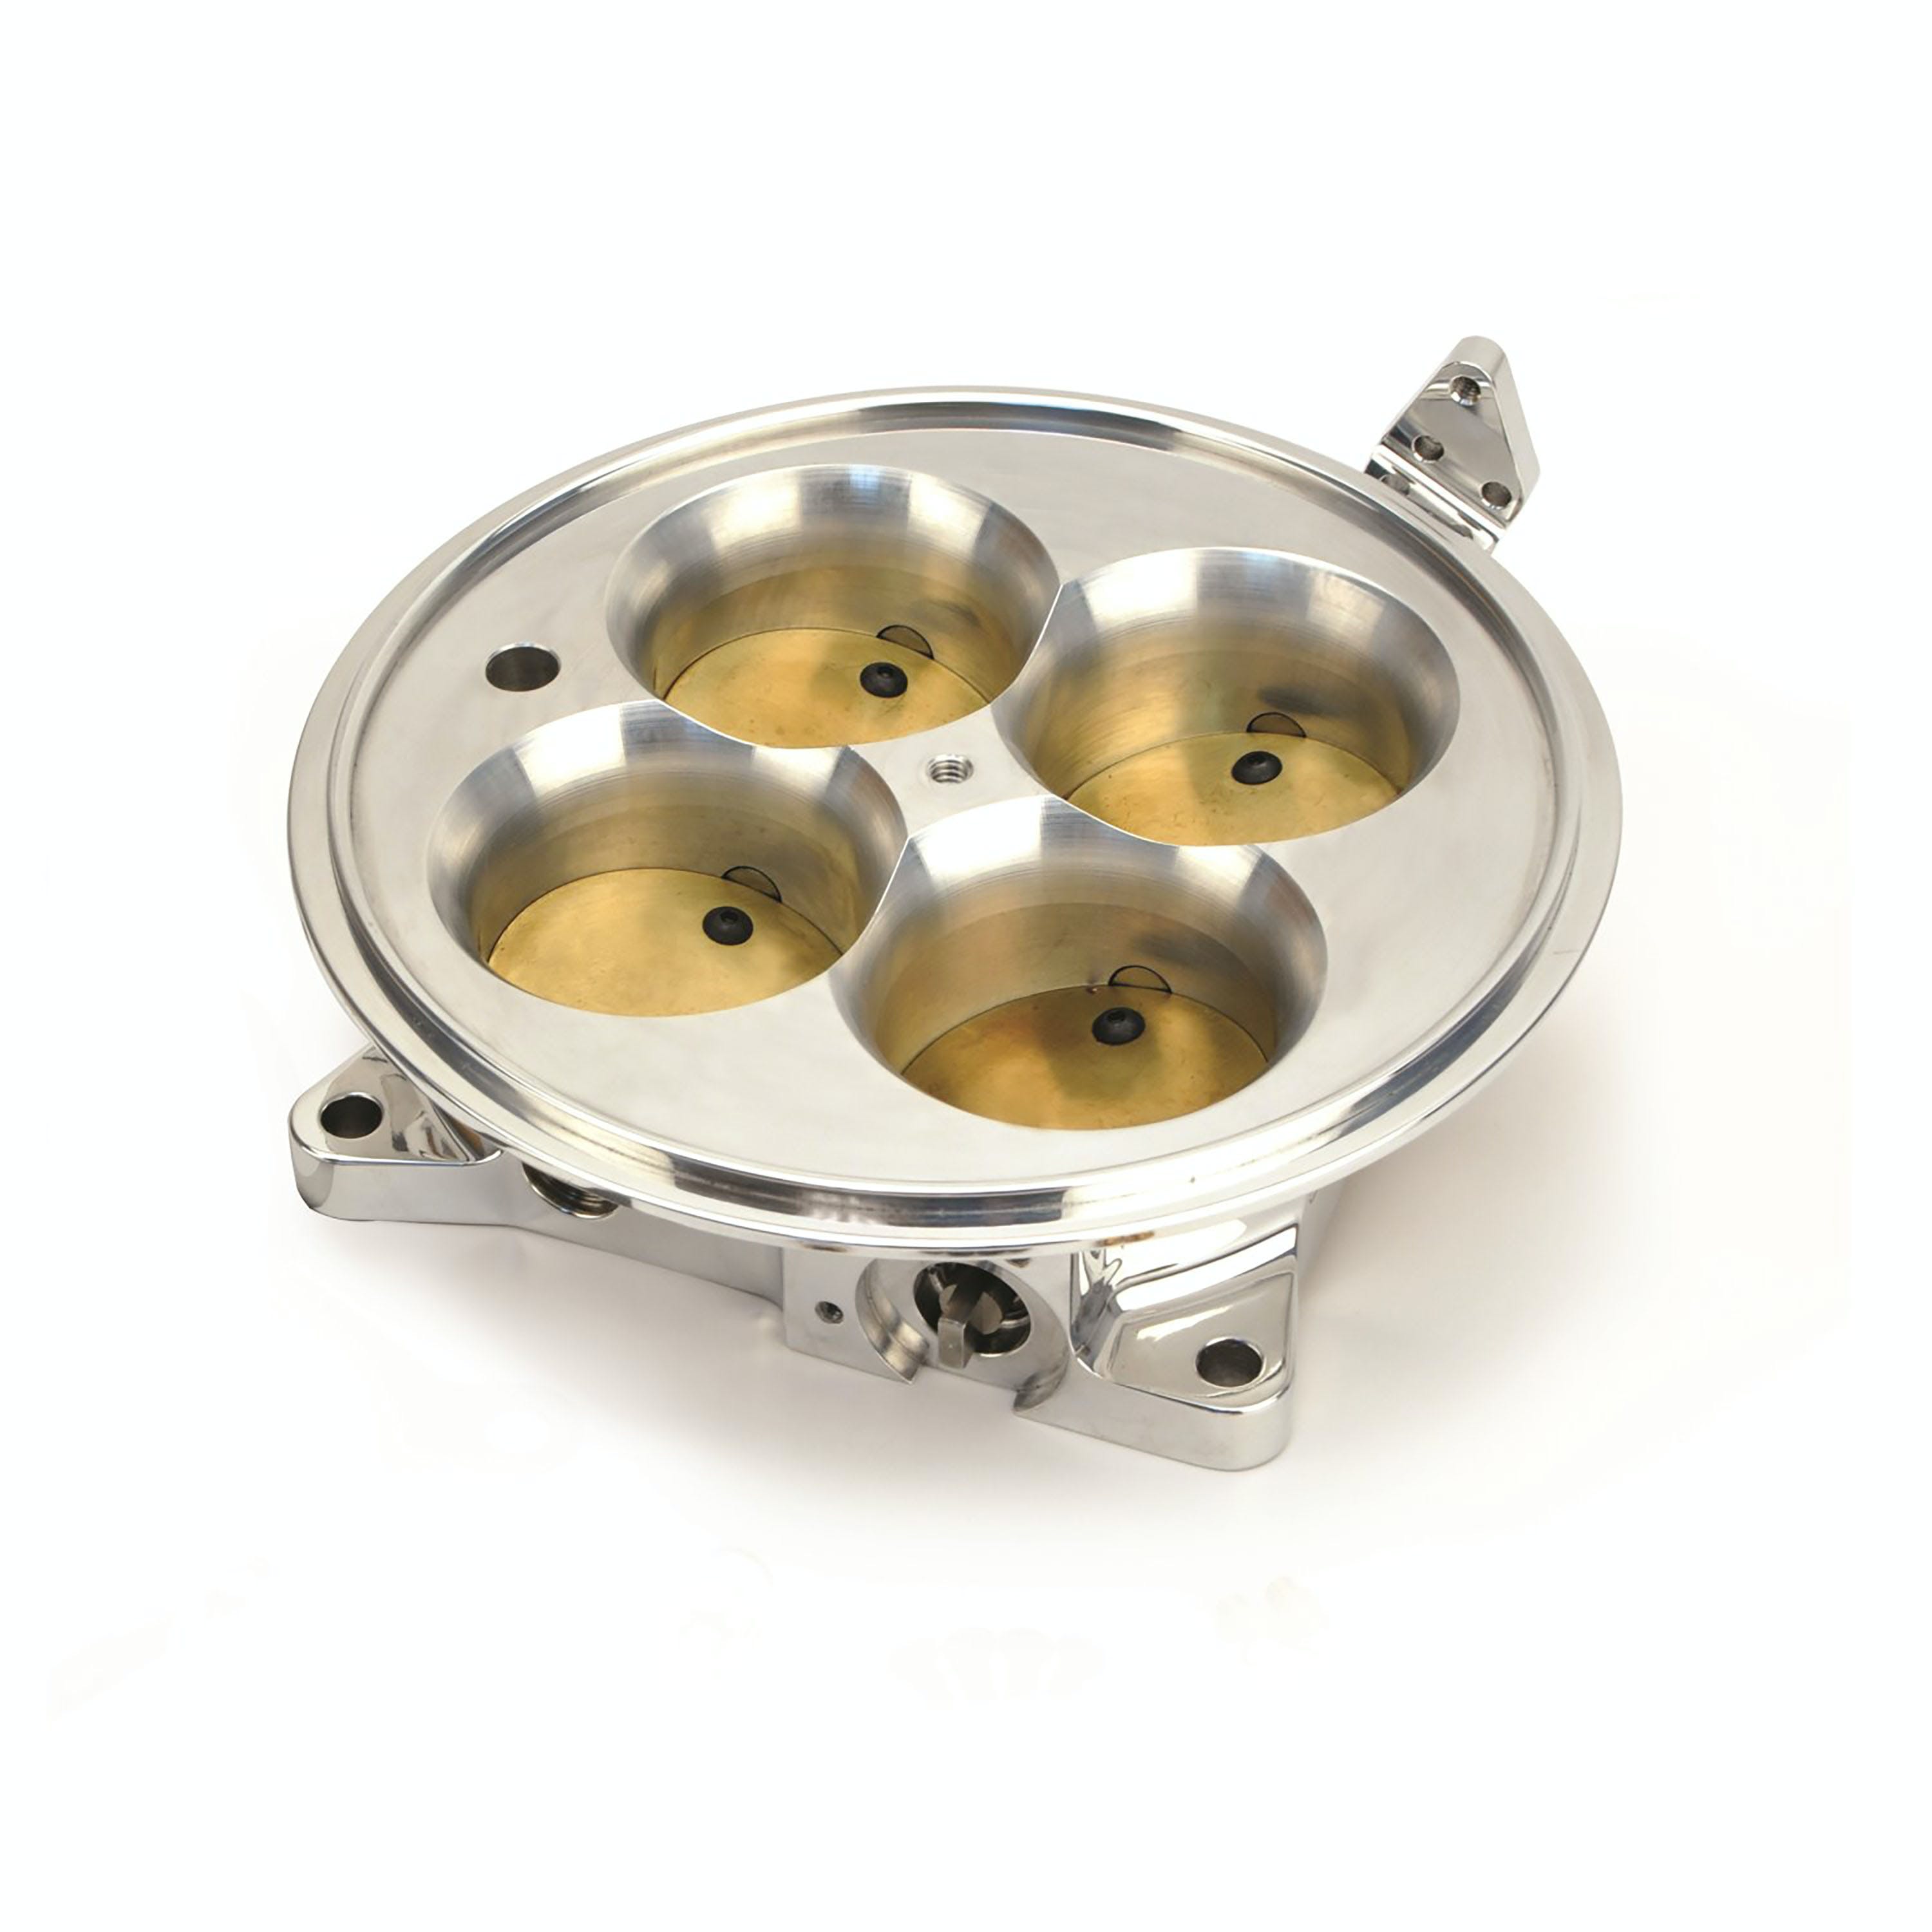 FAST - Fuel Air Spark Technology 307604P Polished 4500 Flange Air Only Throttle Body for Multiport Injection EFI Systems